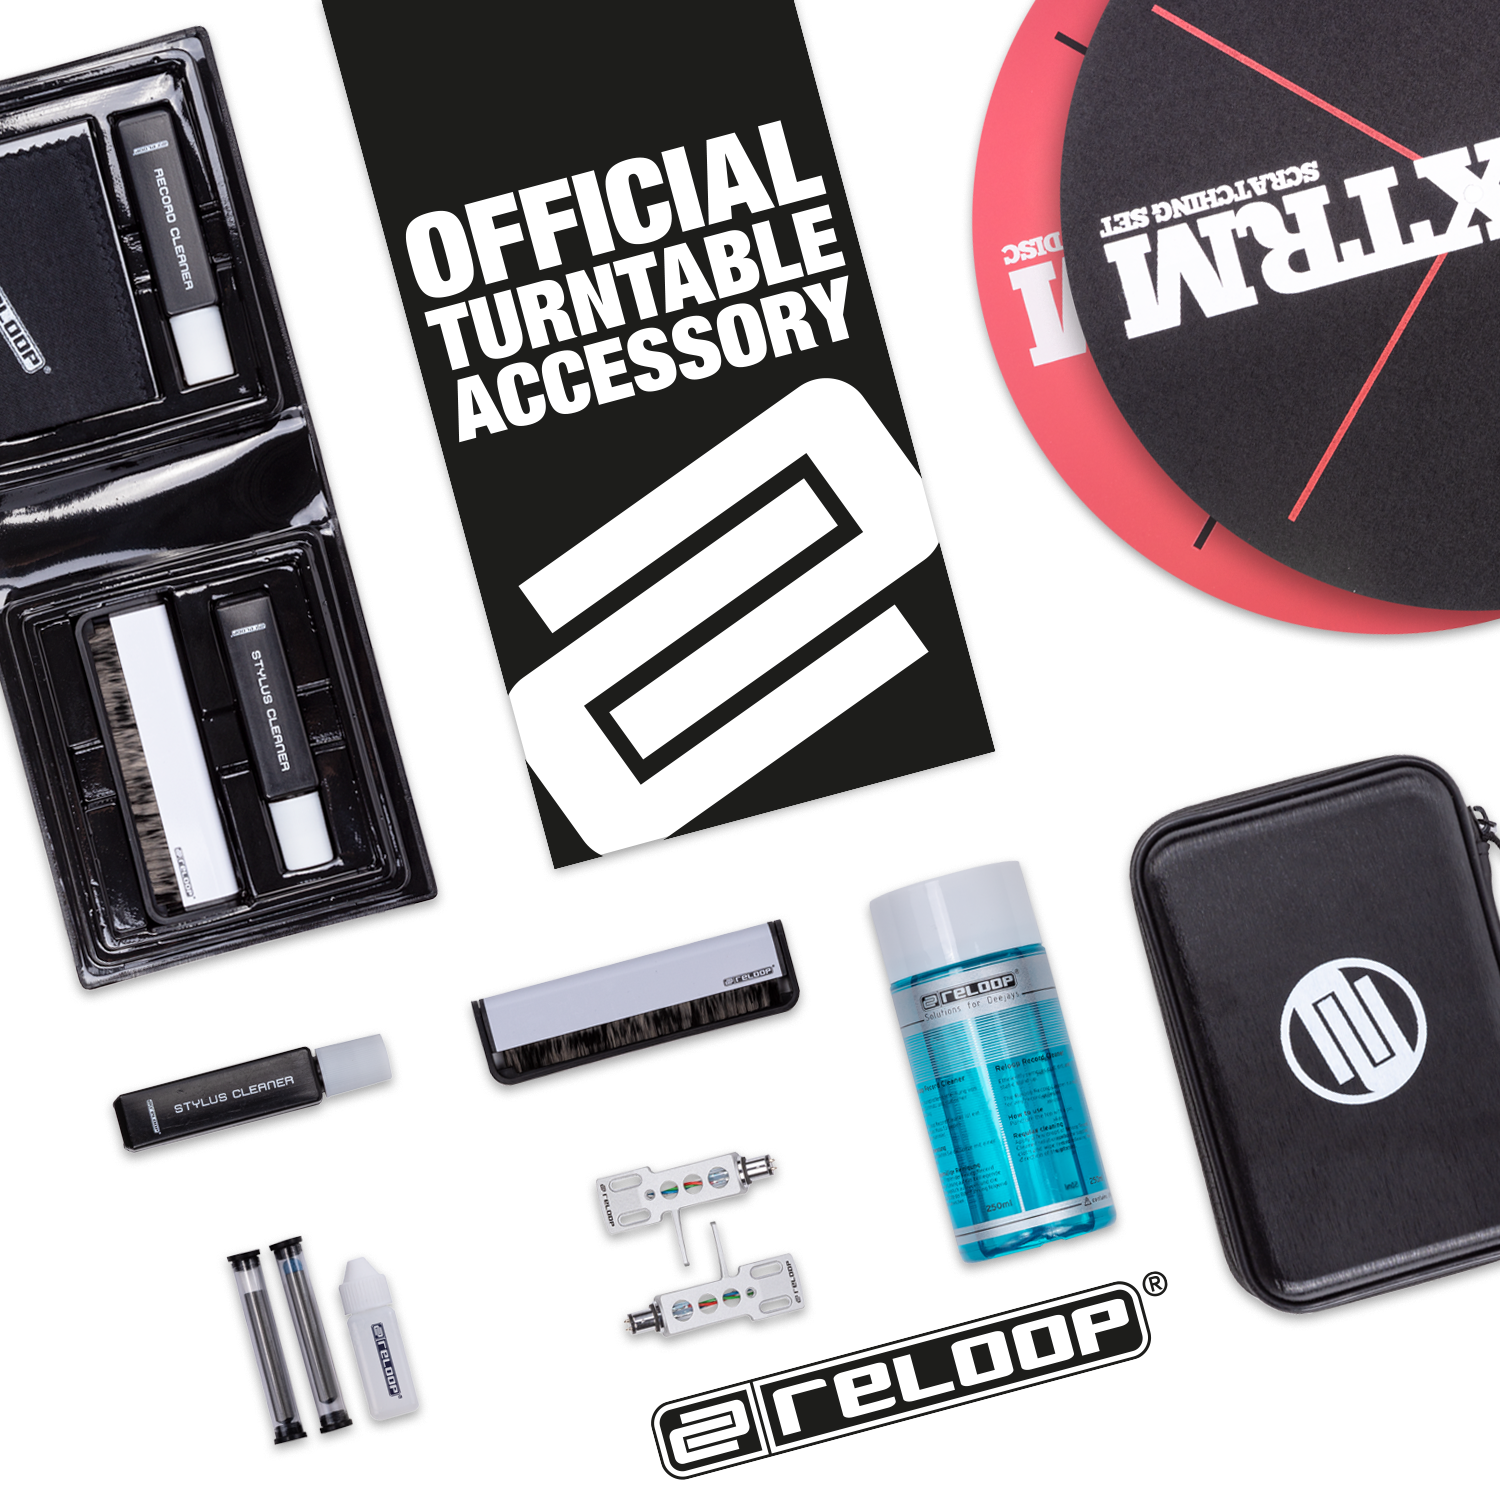 OFFICIAL RELOOP TURNTABLE ACCESSORY